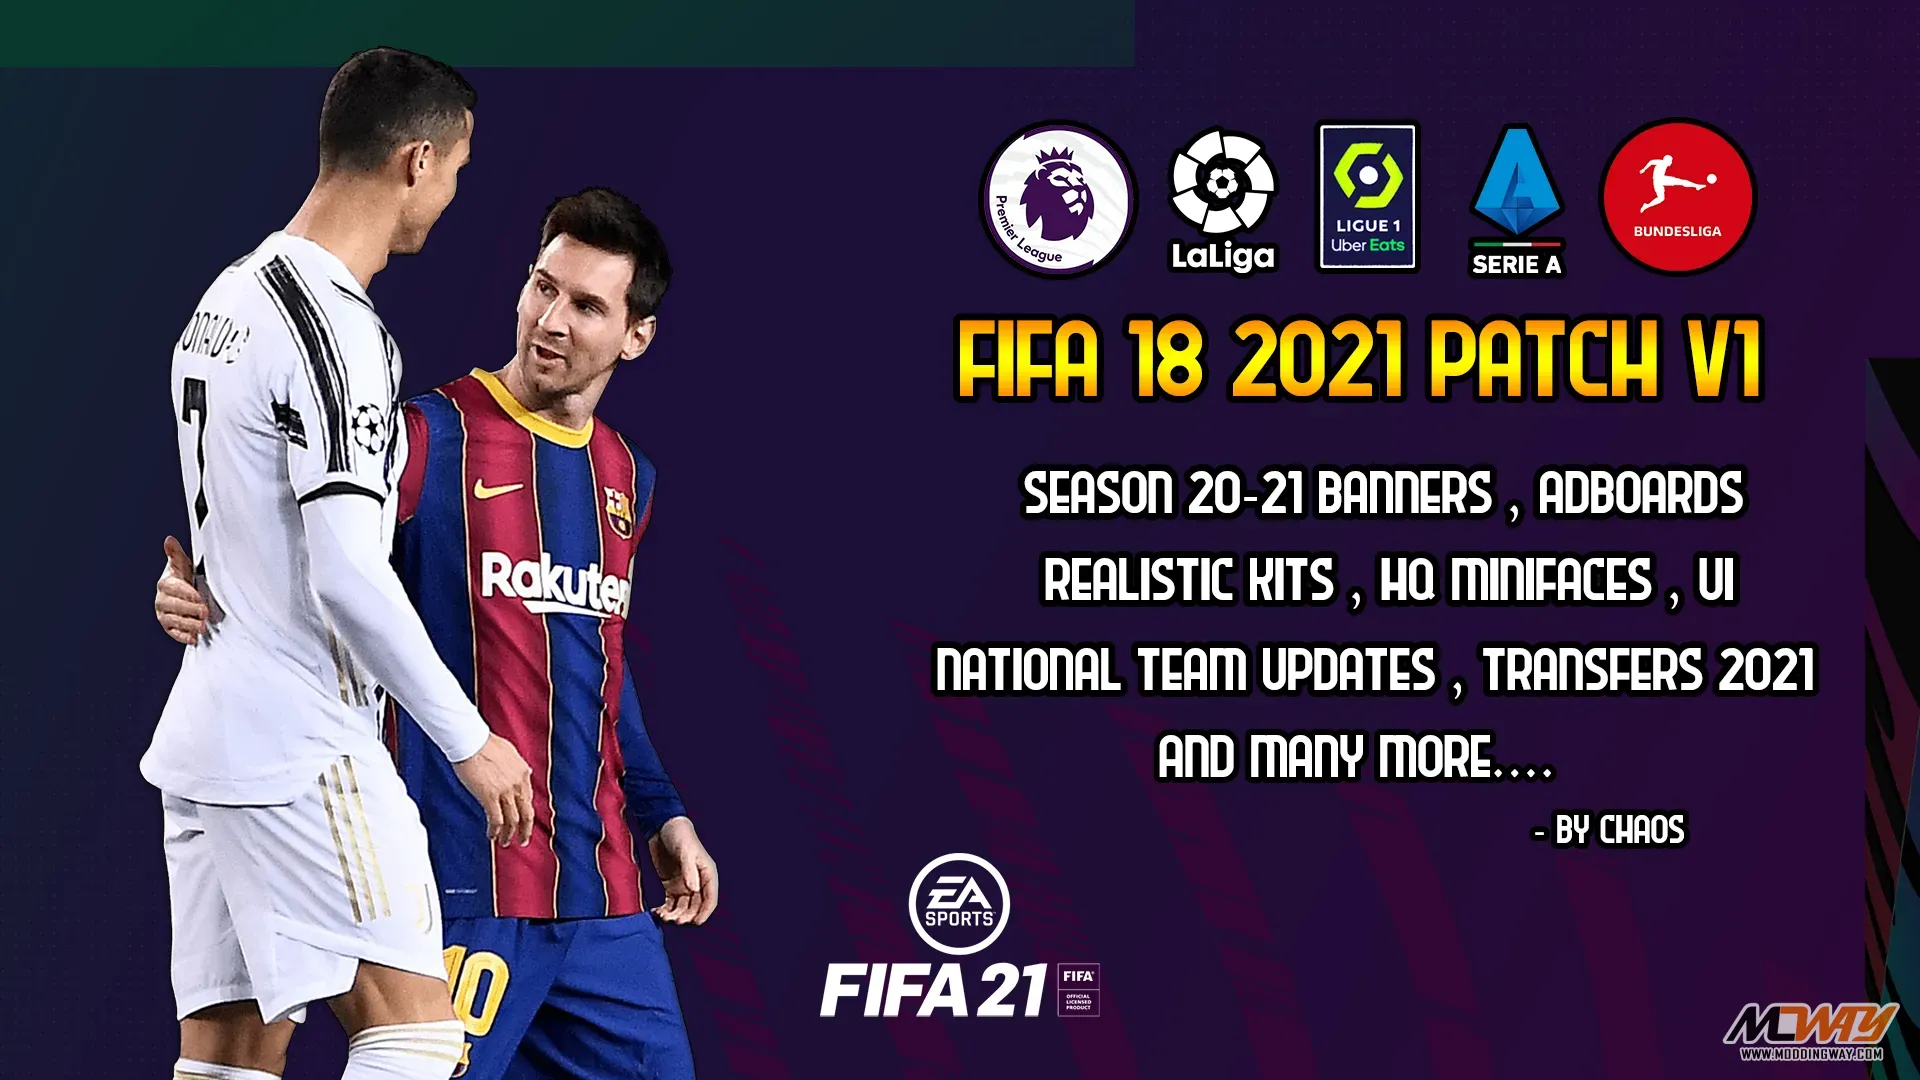 FIFA 18 - Mods, Patches, Updates, Tools, News